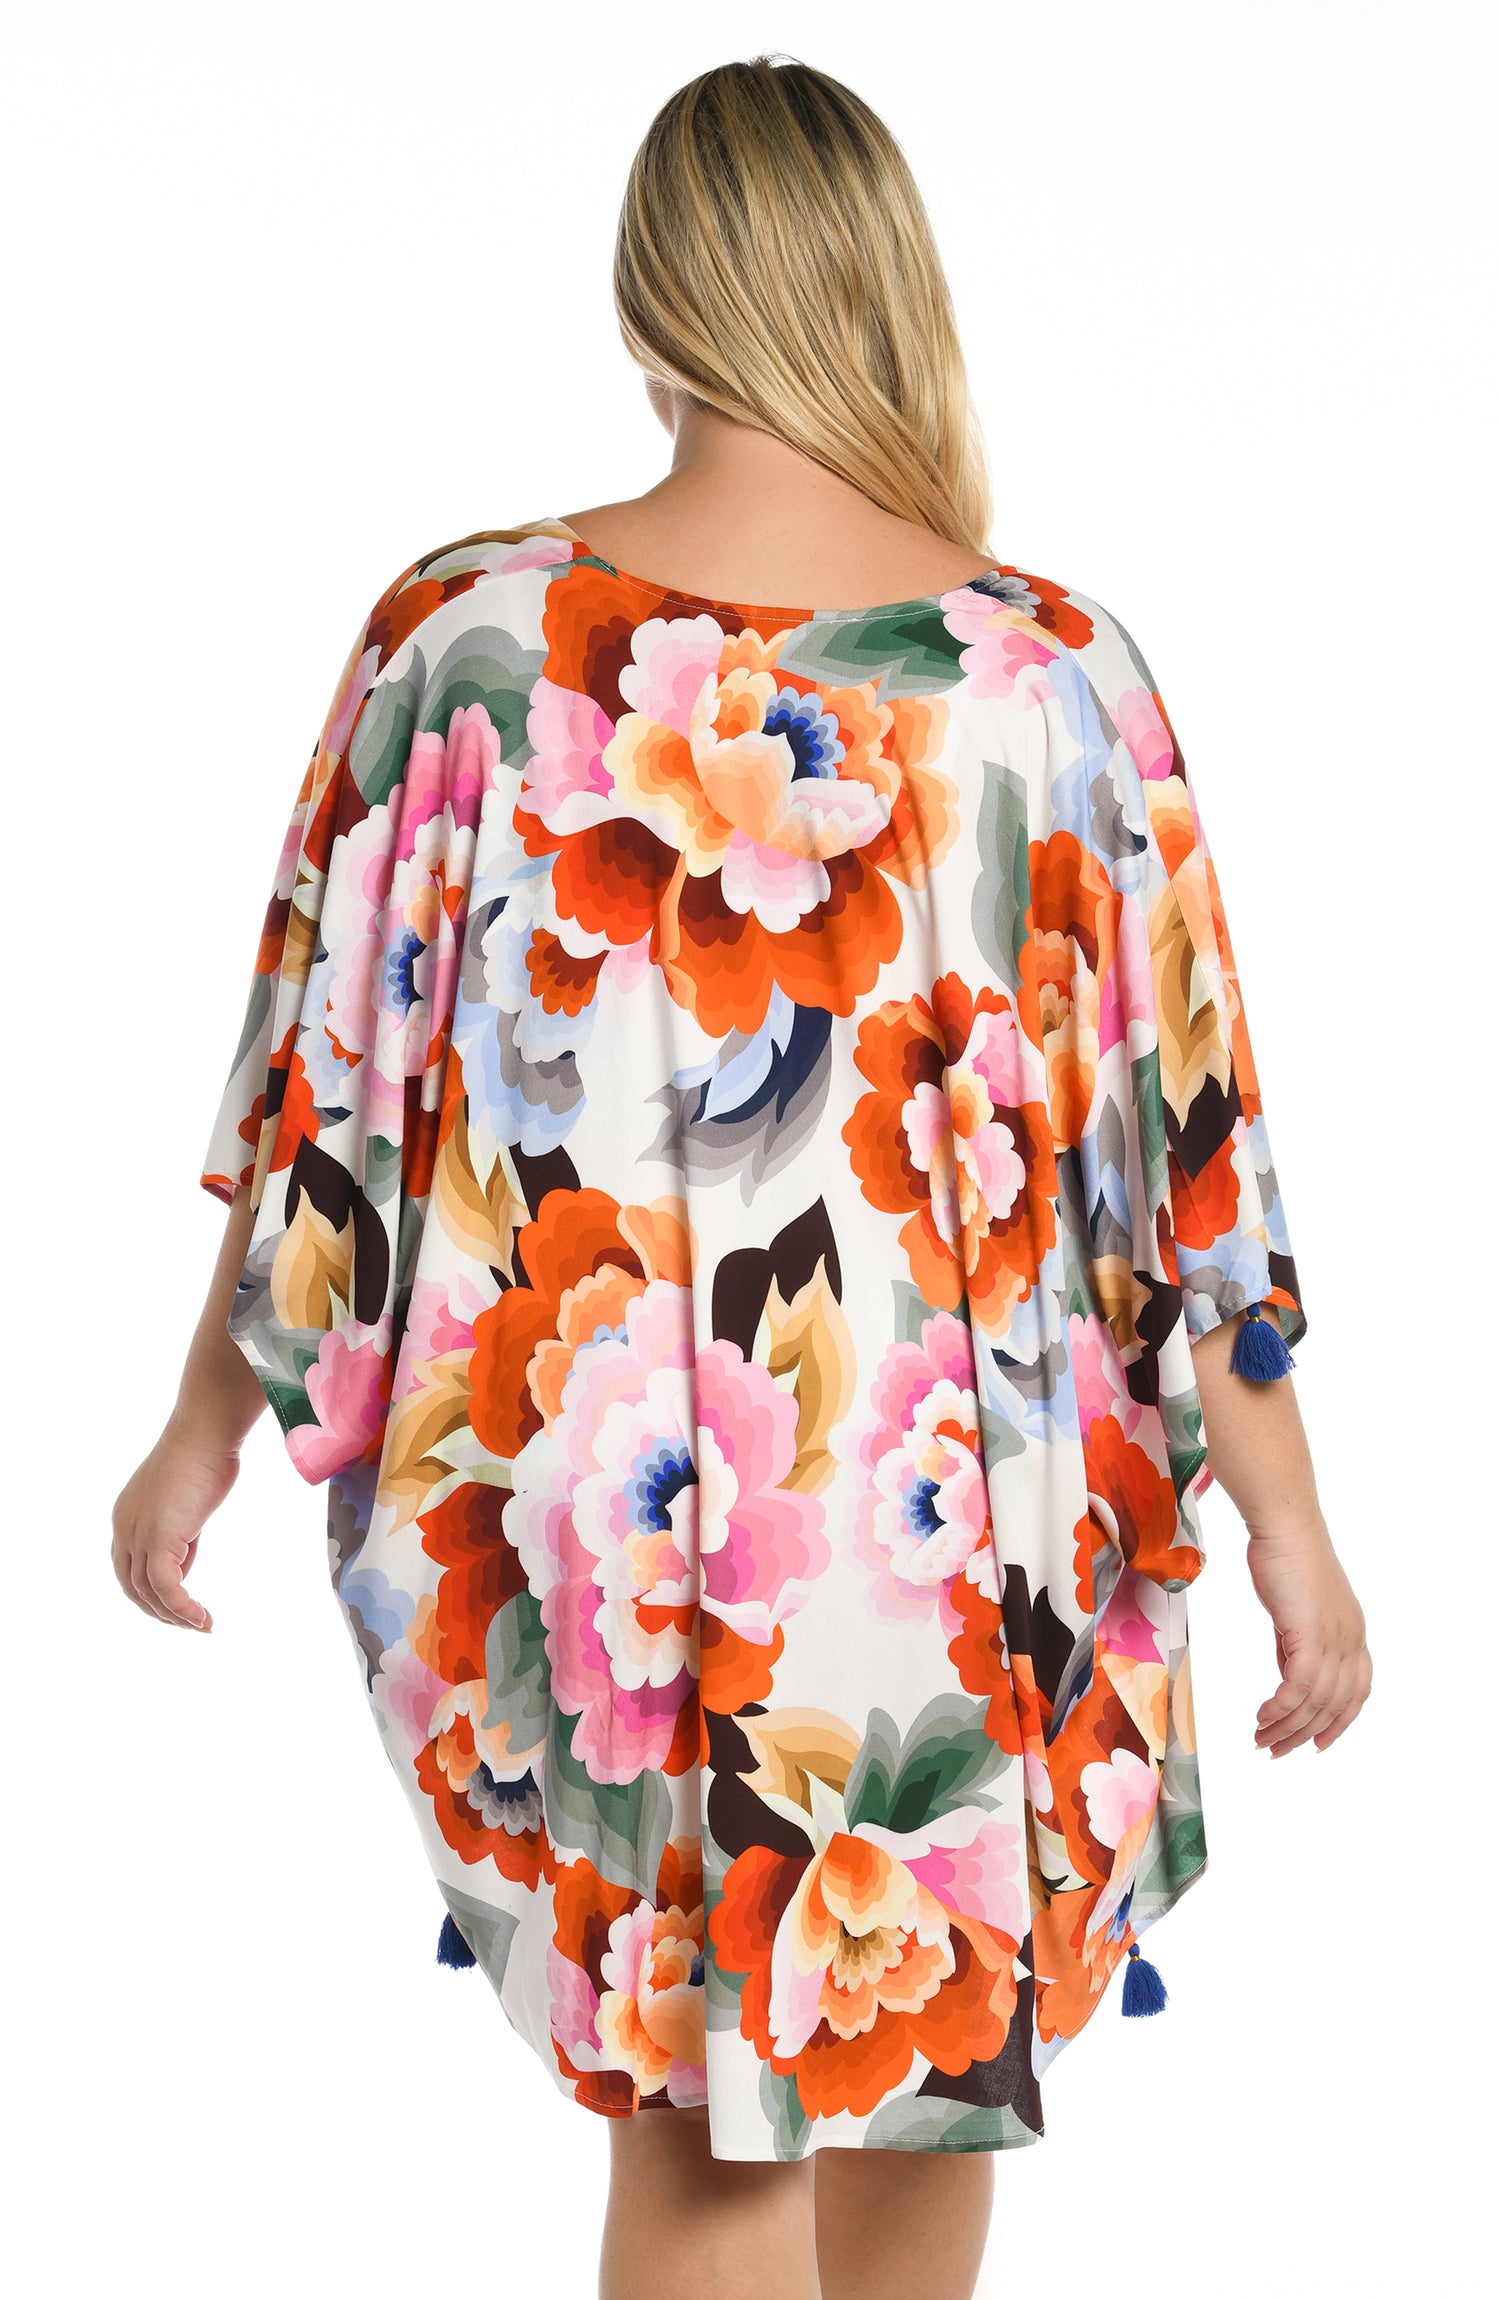 Model is wearing a multi colored floral printed kimono cover up from our Floral Rhythm collection!